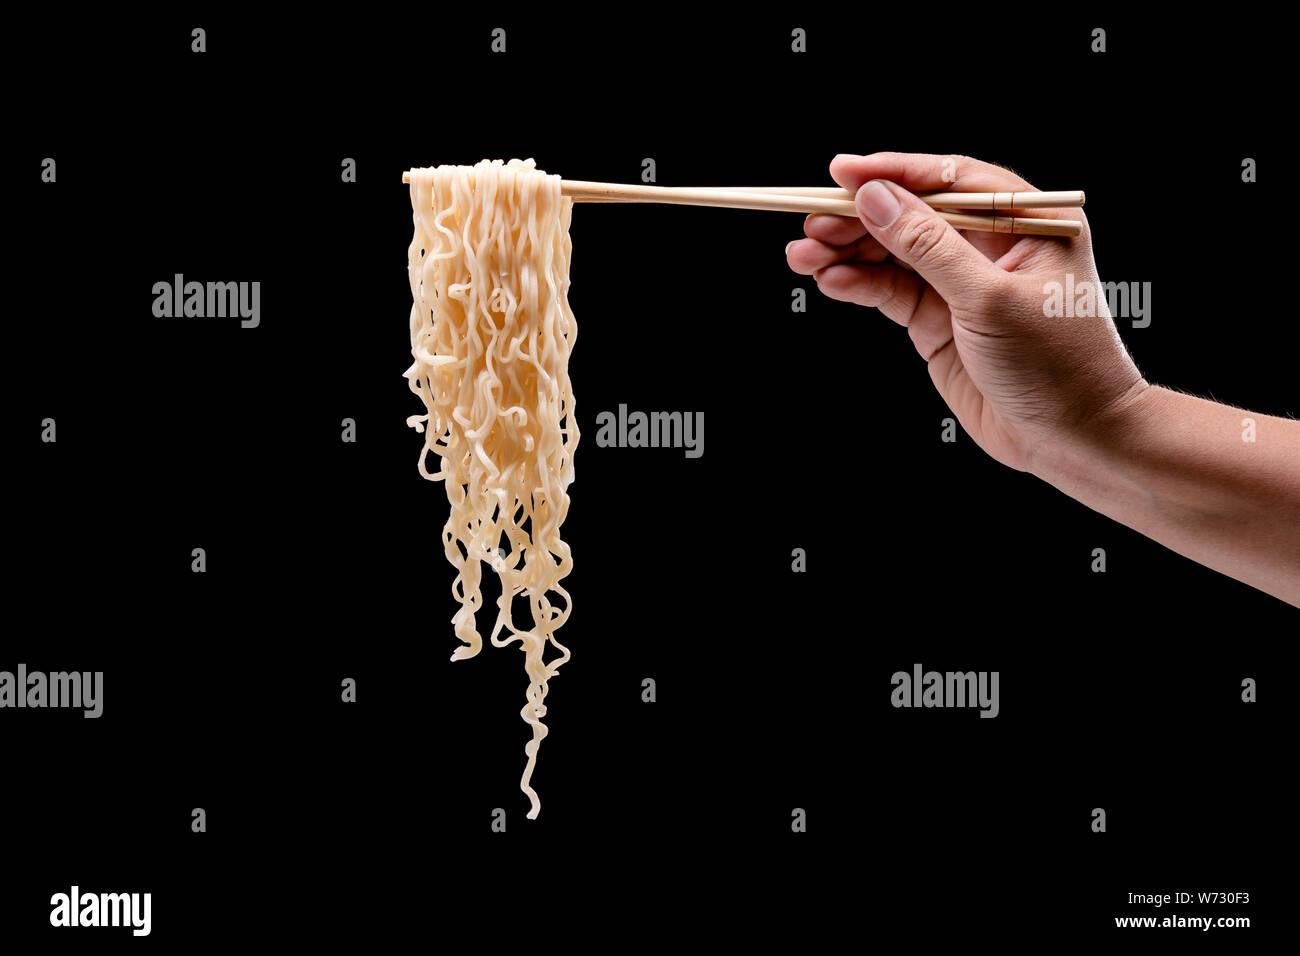 Hand holding bamboo chopsticks and fork over instant noodles. Studio shot isolated on black background Stock Photo